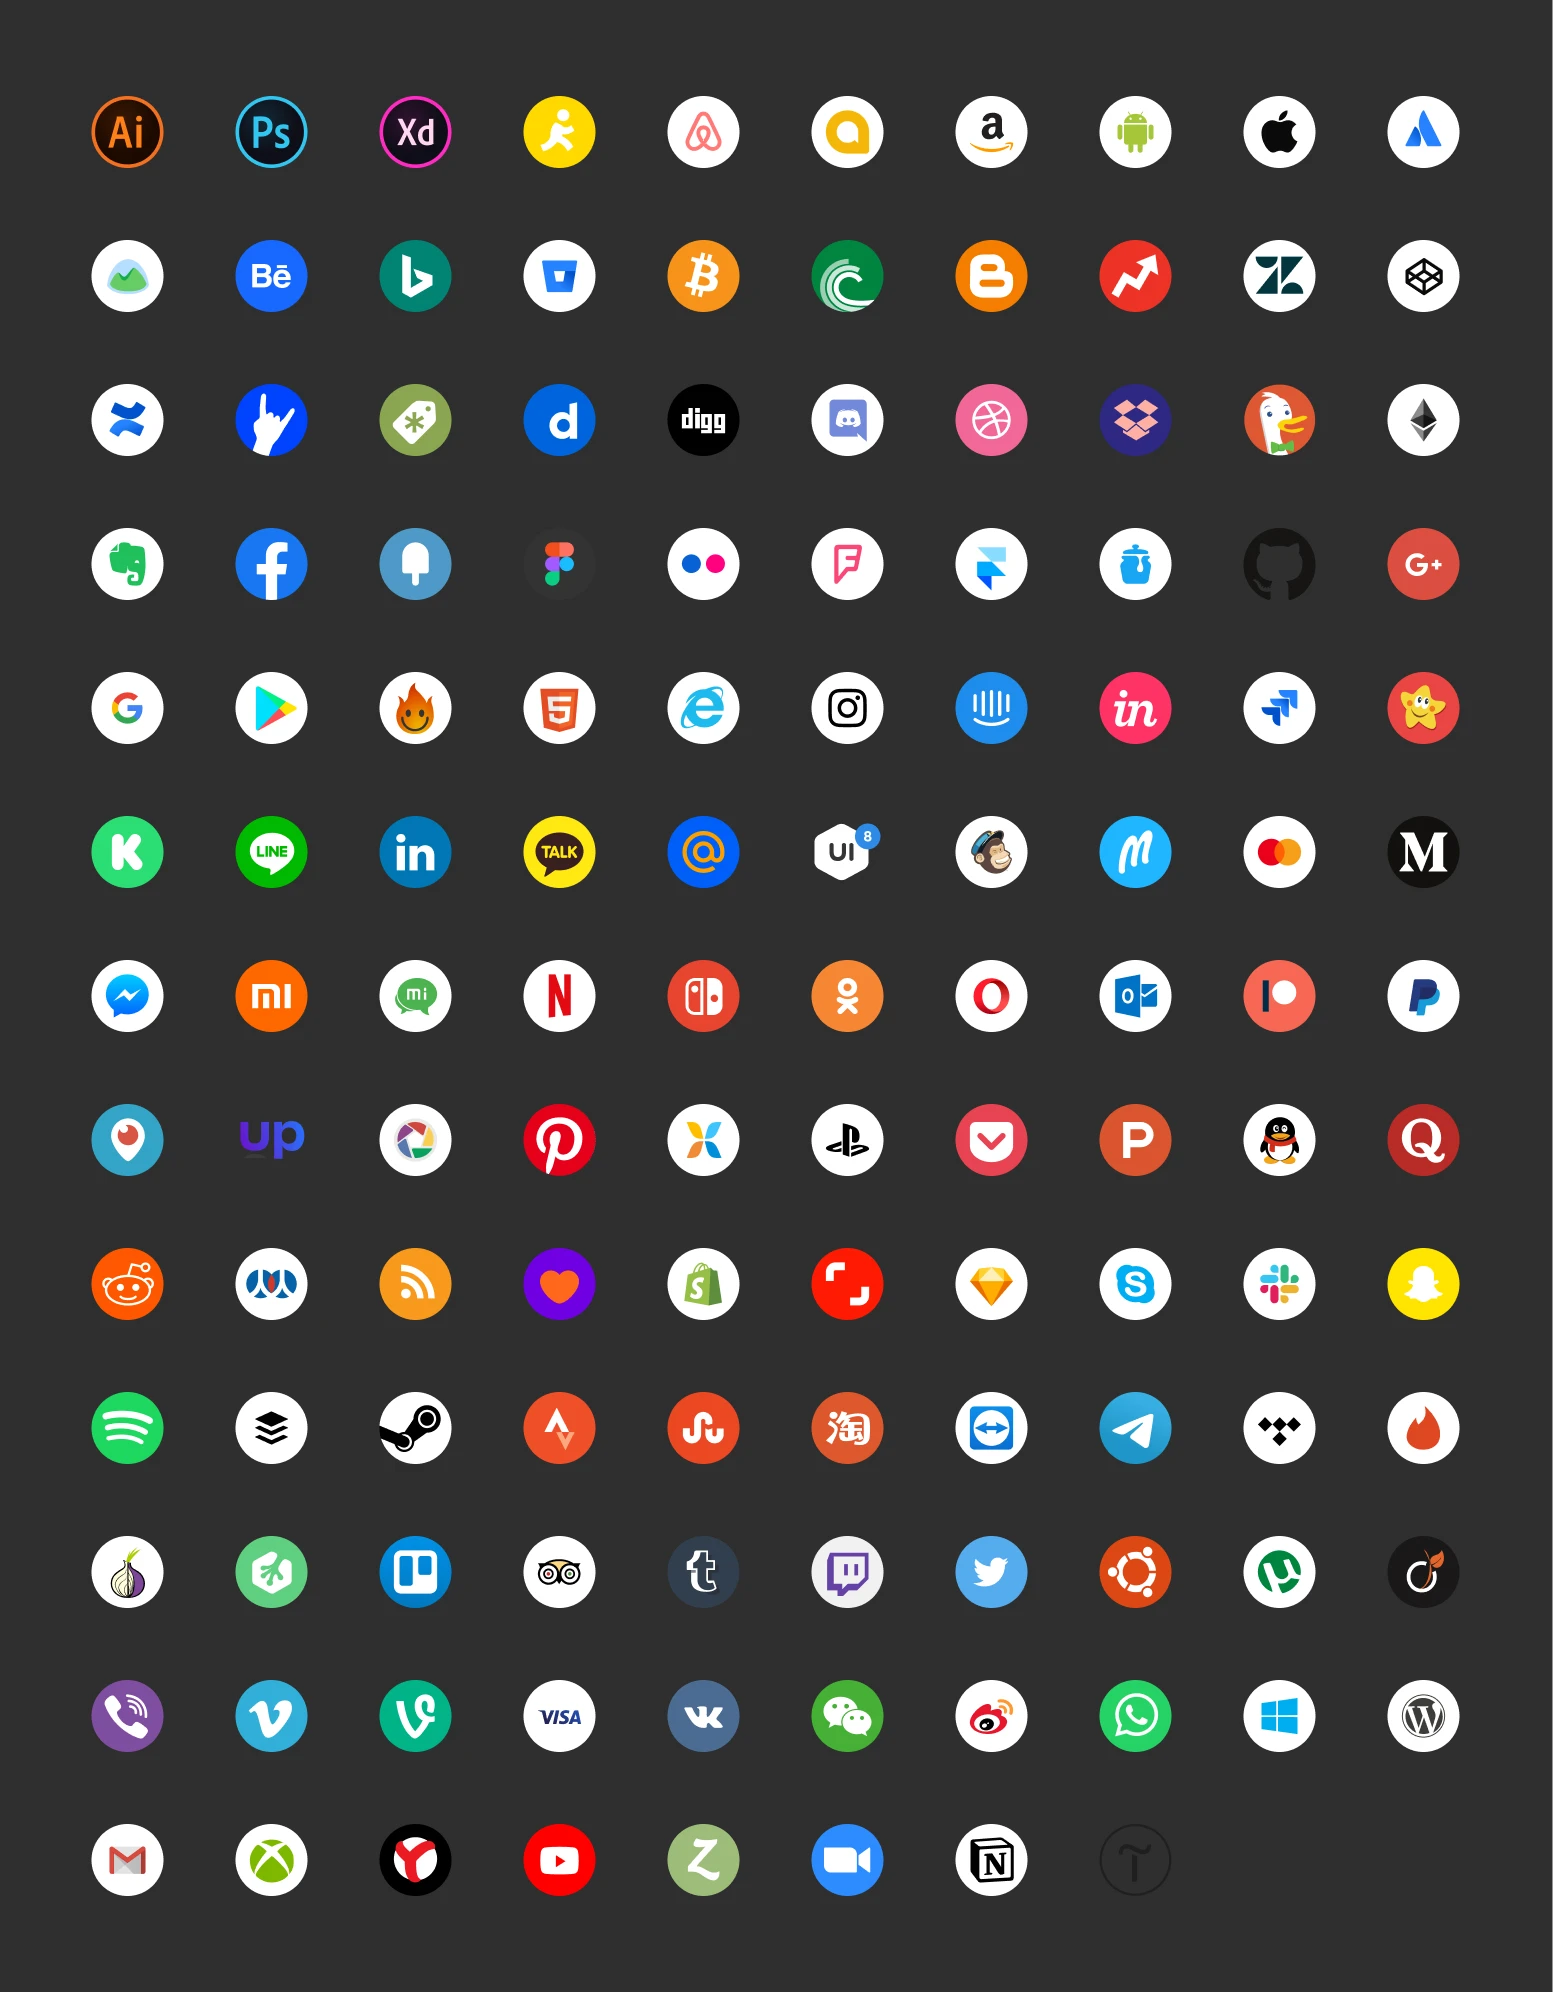 Free Social Icons - Over 100 x 3 Free social icons, color, white, black version